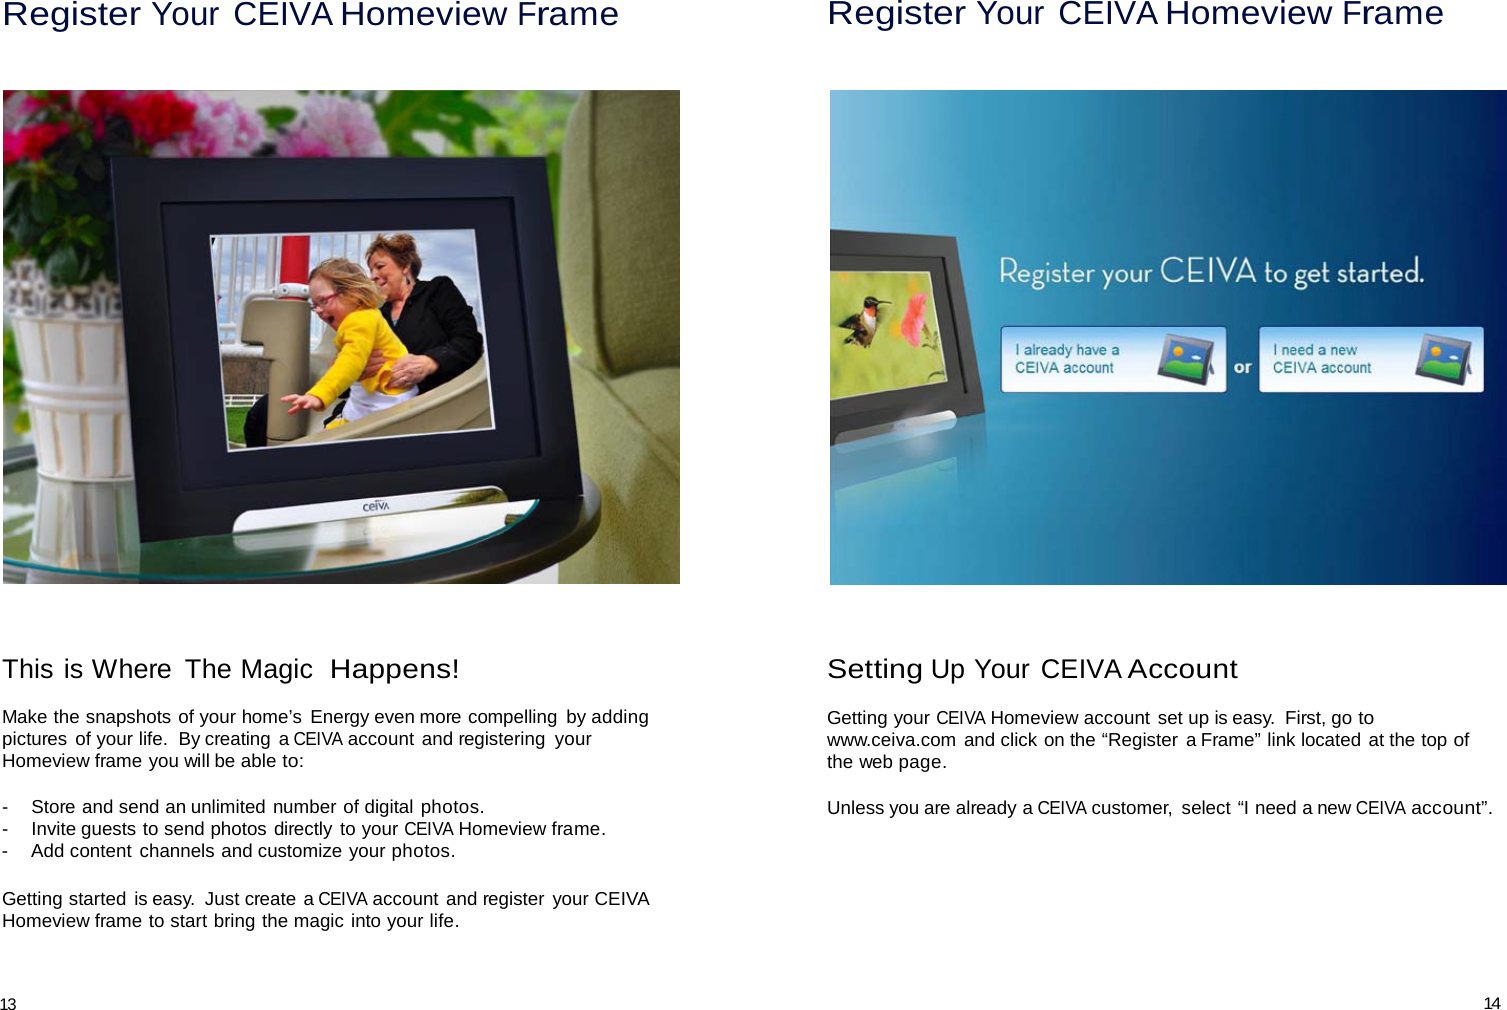 Register Your CEIVA Homeview Frame Register Your CEIVA Homeview Frame         This is Where  The Magic  Happens!  Make the snapshots of your home’s  Energy even more compelling  by adding pictures  of your life.  By creating  a CEIVA account and registering  your Homeview frame you will be able to:  -   Store and send an unlimited number of digital photos. -   Invite guests to send photos directly to your CEIVA Homeview frame. -   Add content channels and customize your photos.  Getting started is easy.  Just create a CEIVA account and register your CEIVA Homeview frame to start bring the magic into your life. Setting Up Your CEIVA Account  Getting your CEIVA Homeview account set up is easy.  First, go to www.ceiva.com  and click on the “Register  a Frame” link located at the top of the web page.  Unless you are already a CEIVA customer,  select “I need a new CEIVA account”.    13 14 